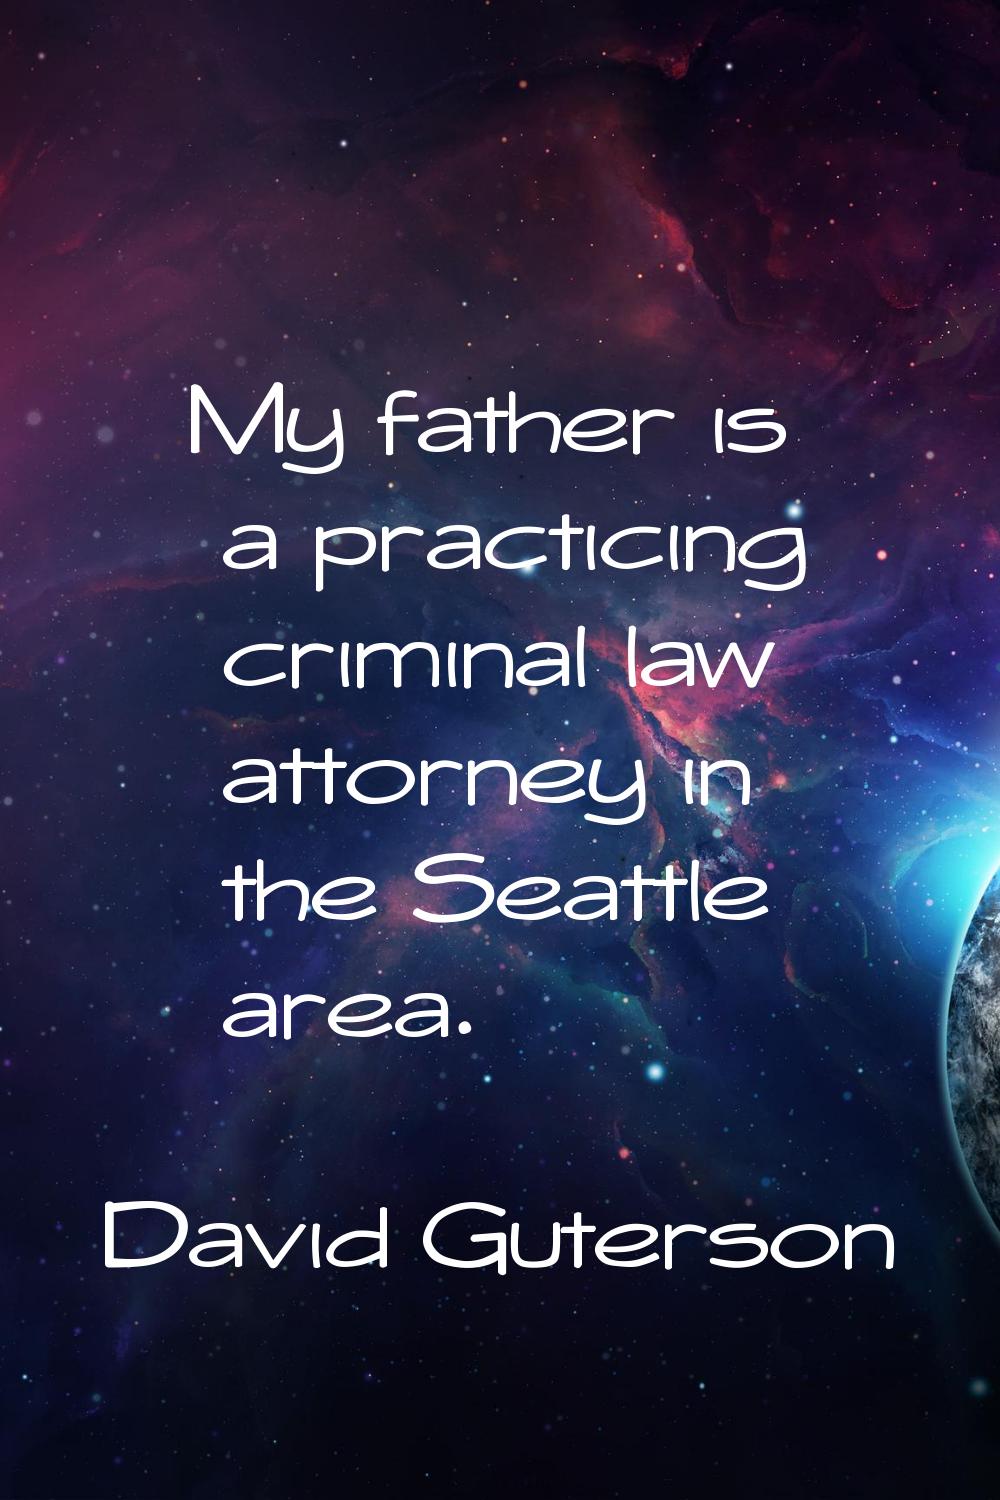 My father is a practicing criminal law attorney in the Seattle area.